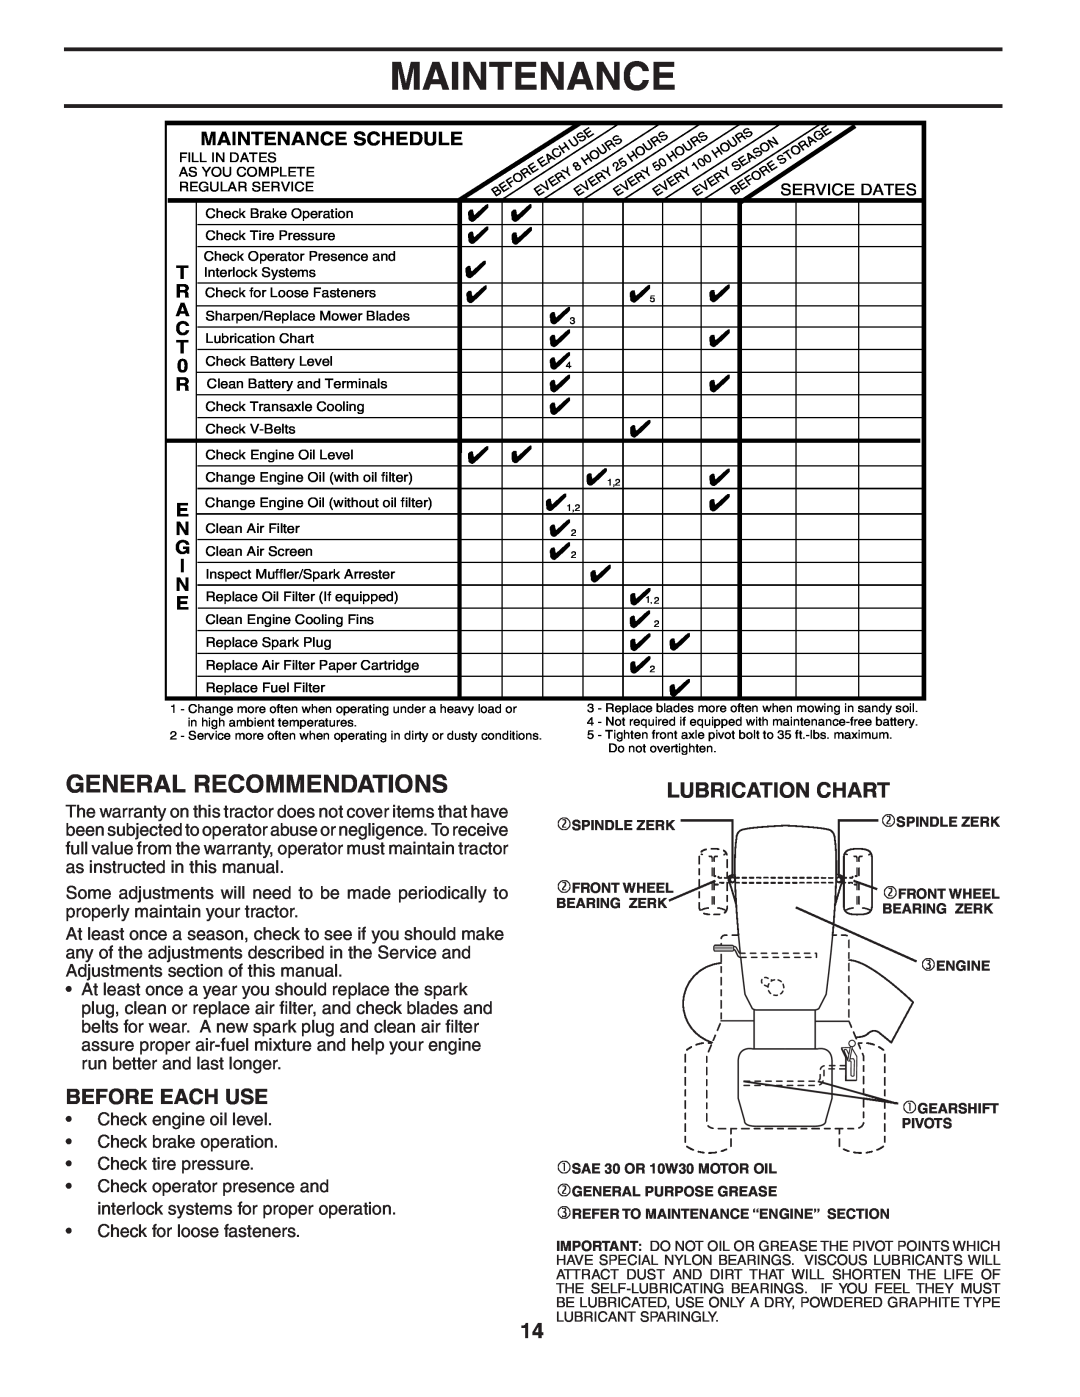 Weed Eater WET2242STD manual Maintenance, General Recommendations, Before Each Use, Lubrication Chart 